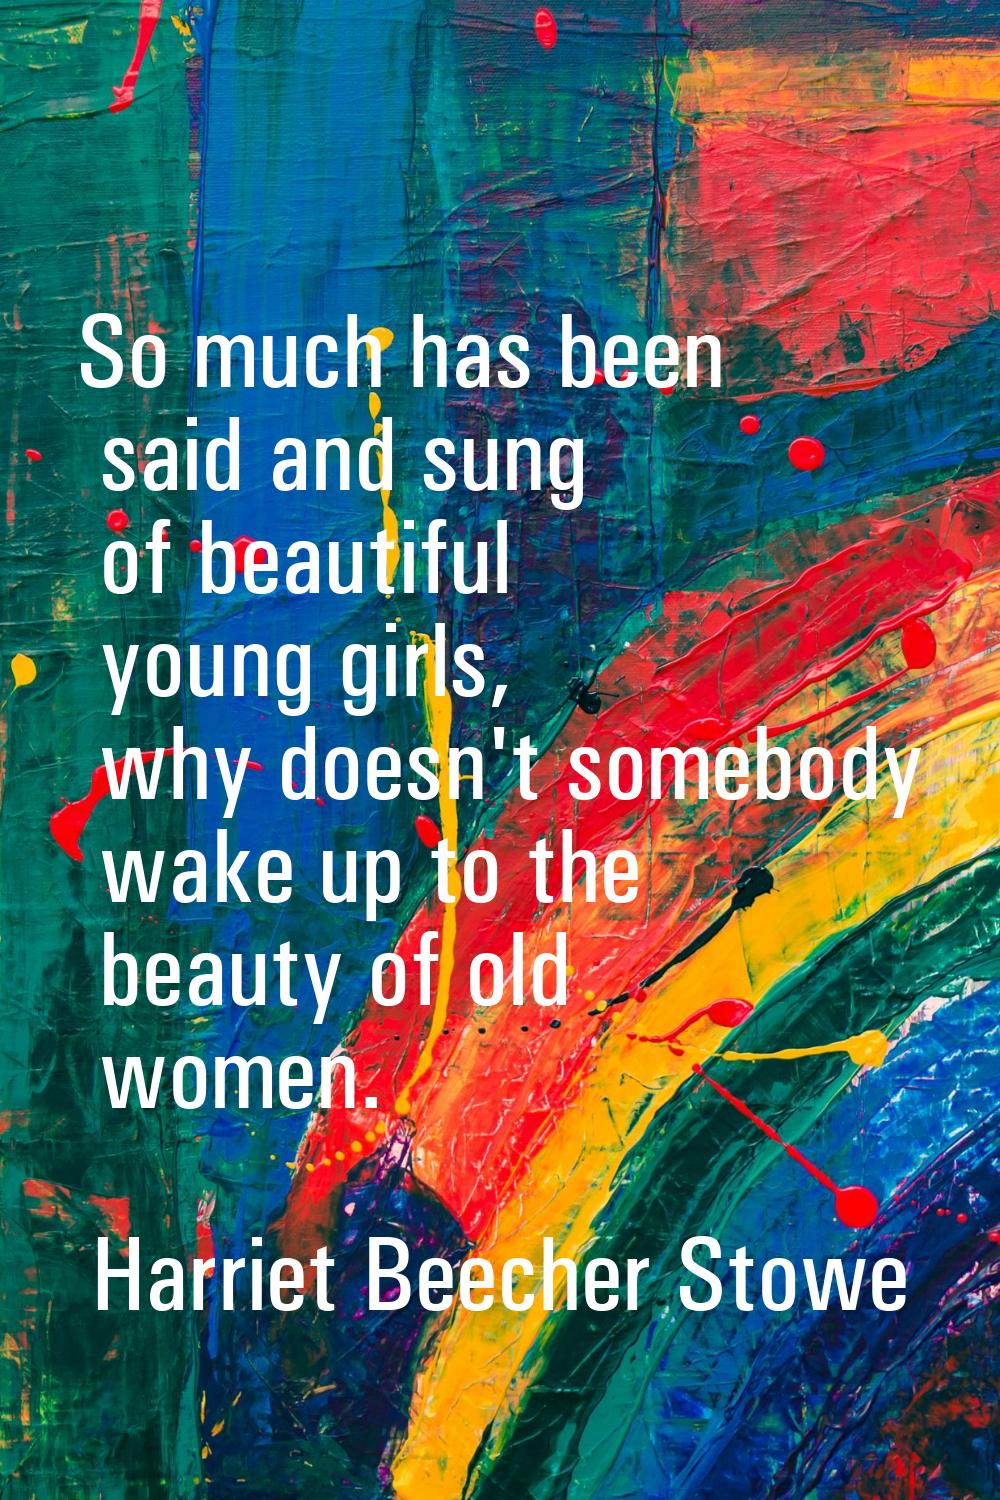 So much has been said and sung of beautiful young girls, why doesn't somebody wake up to the beauty